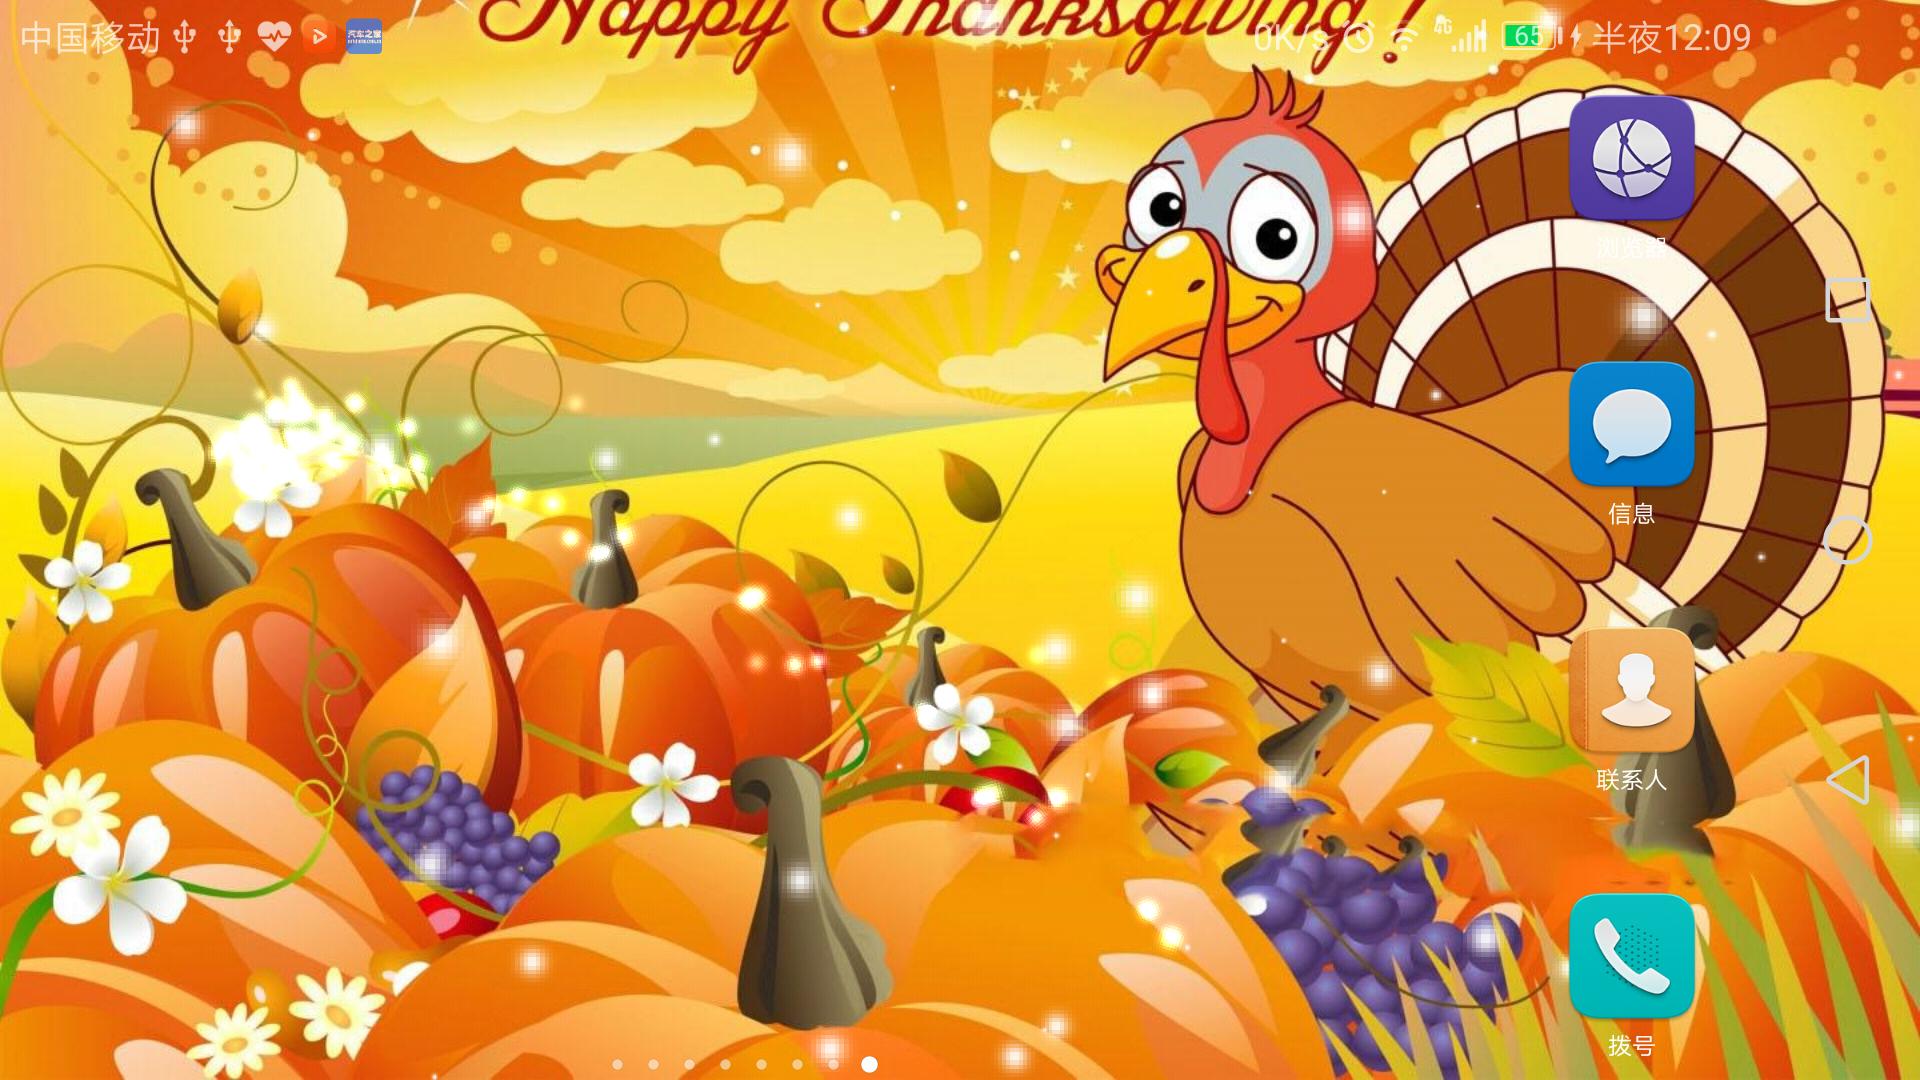 Thanksgiving Android Wallpapers posted by Michelle Anderson